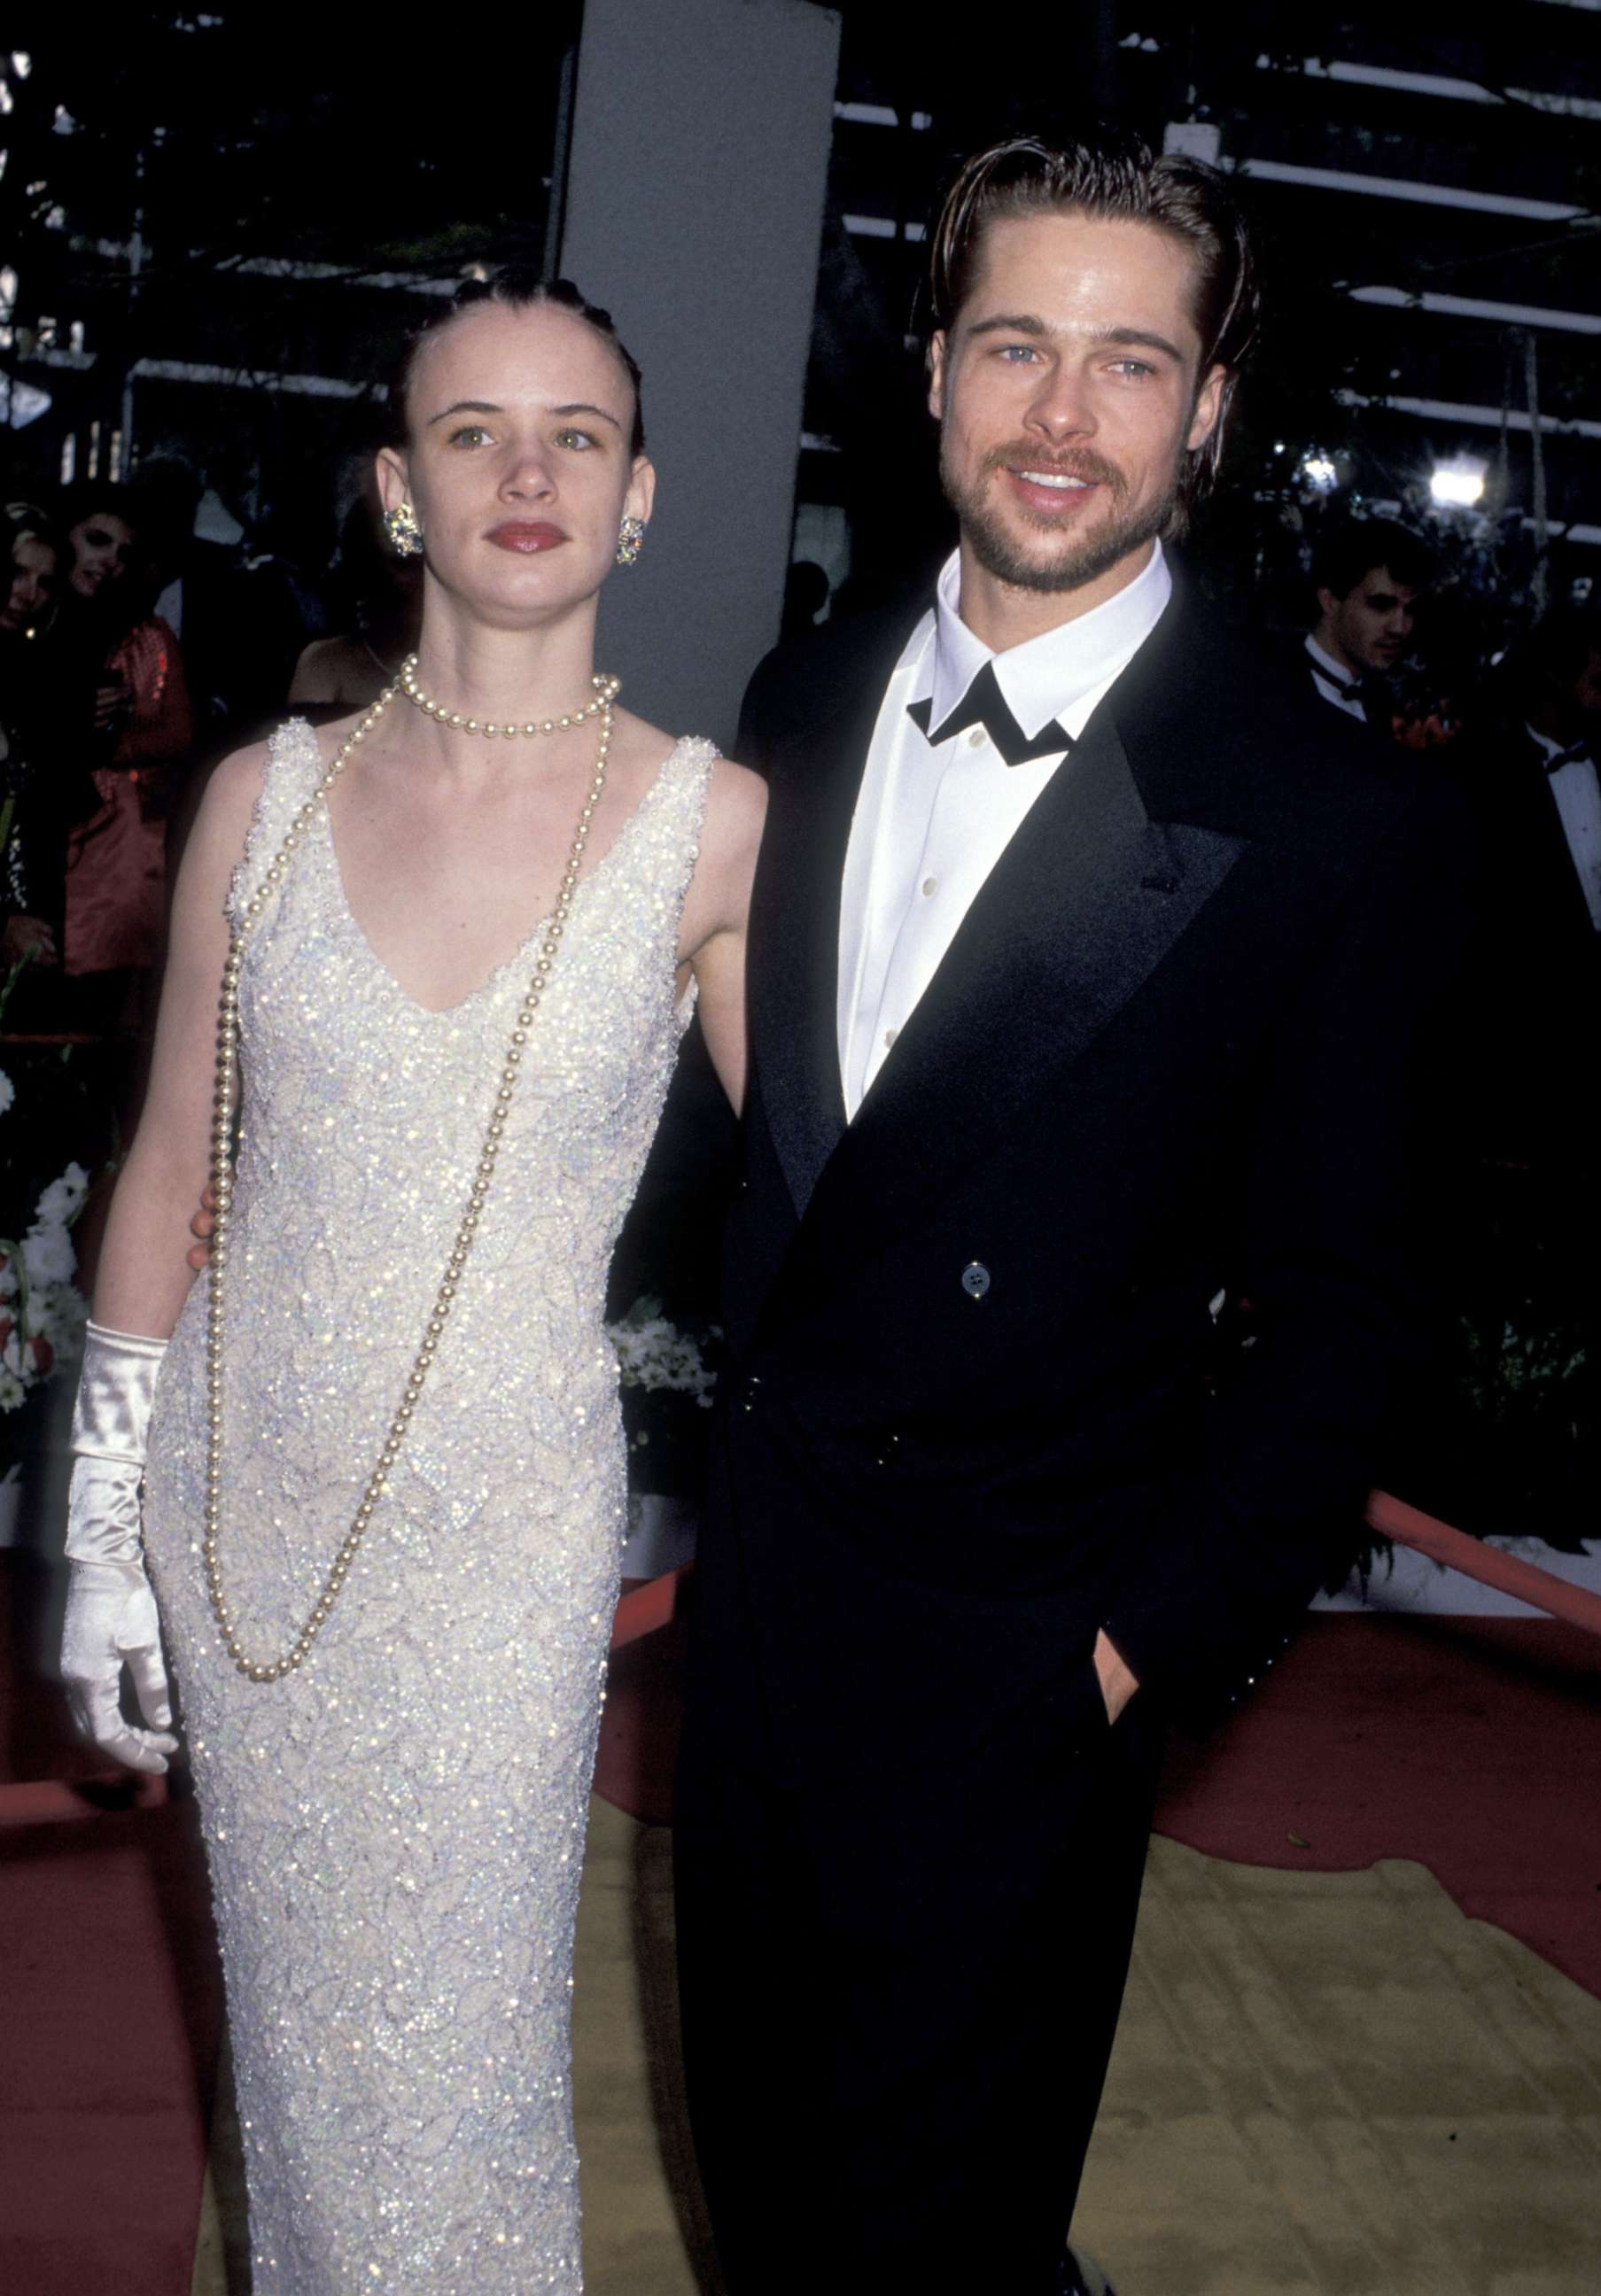 PHOTO: Juliette Lewis and Brad Pitt at the Dorothy Chandler Pavilion in Los Angeles, California (Photo by Ron Galella/Ron Galella Collection via Getty Images)